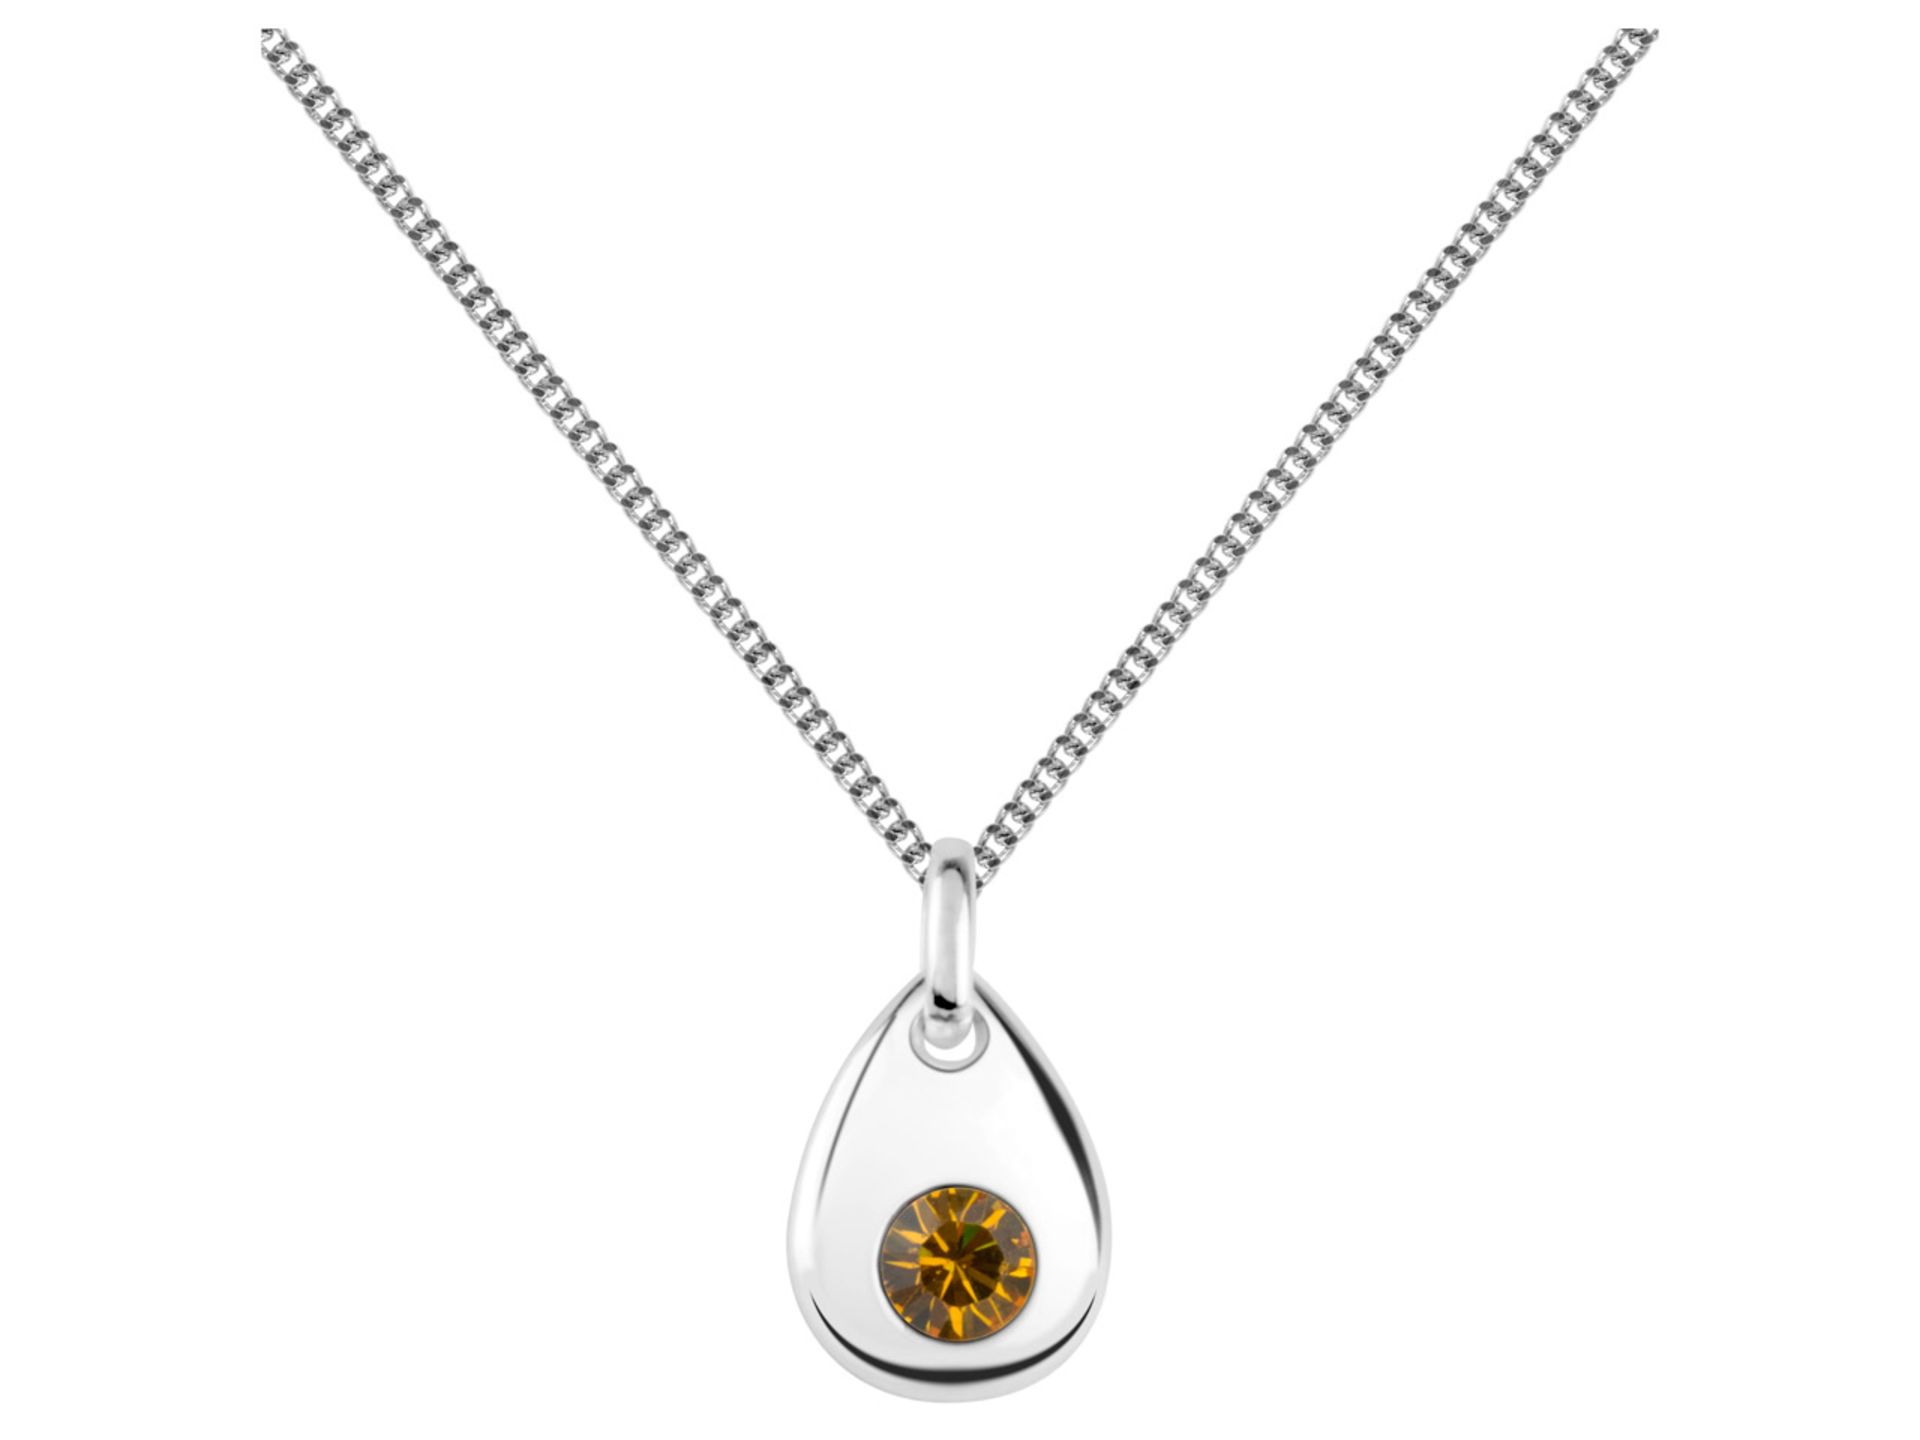 Sterling Silver Pendant November Birthstone 4mm Topaz Crystal - Valued By AGI £125.00 - Colour- - Image 3 of 4